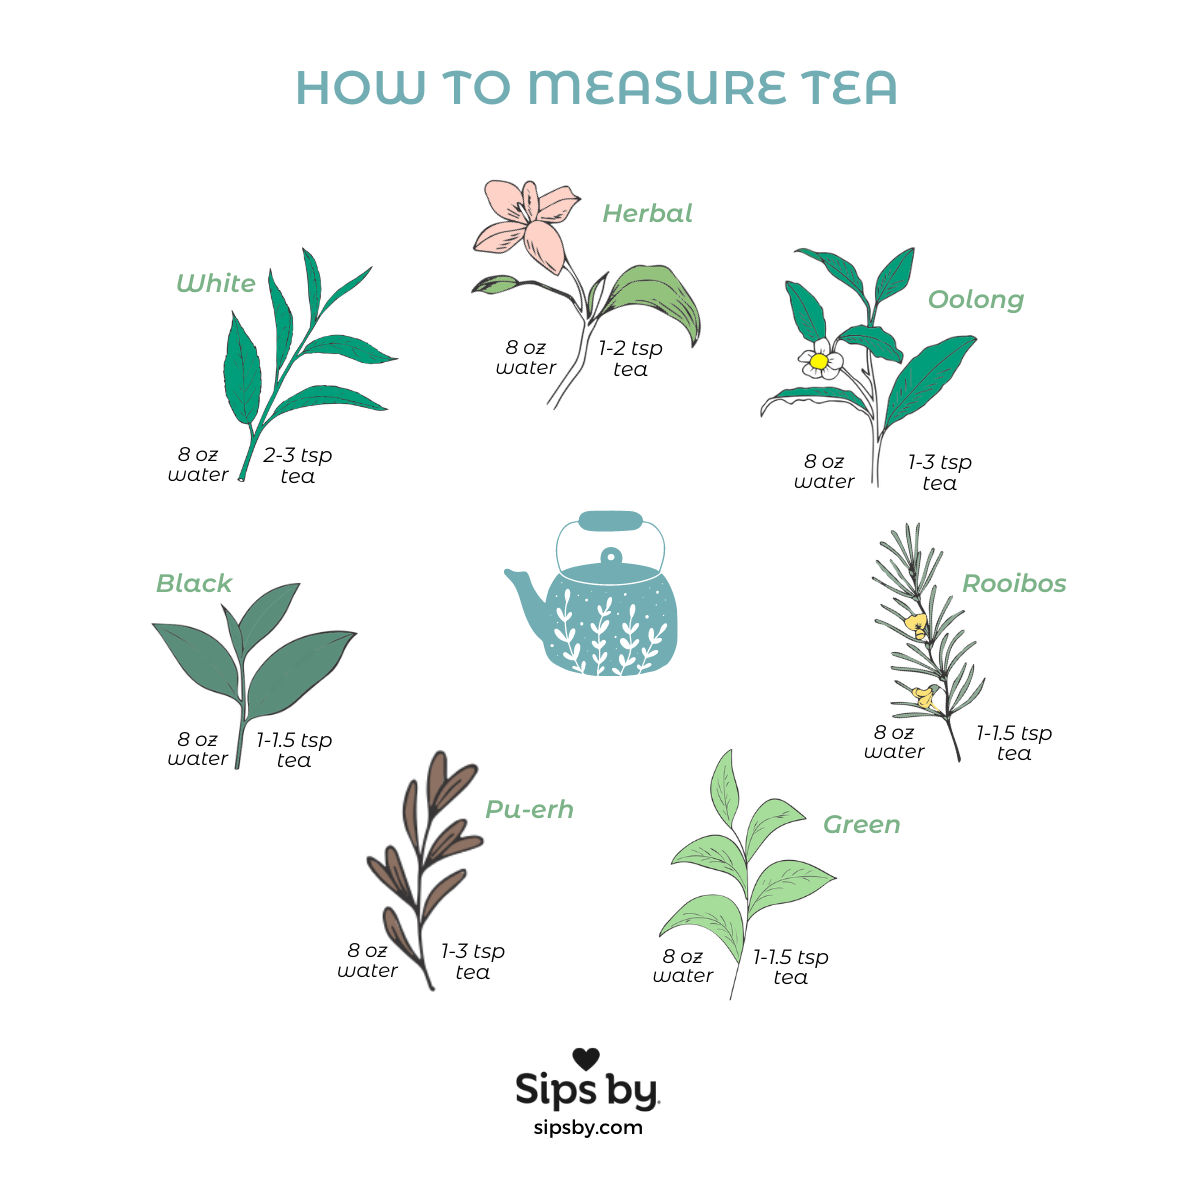 Learn how to measure tea from Sips by